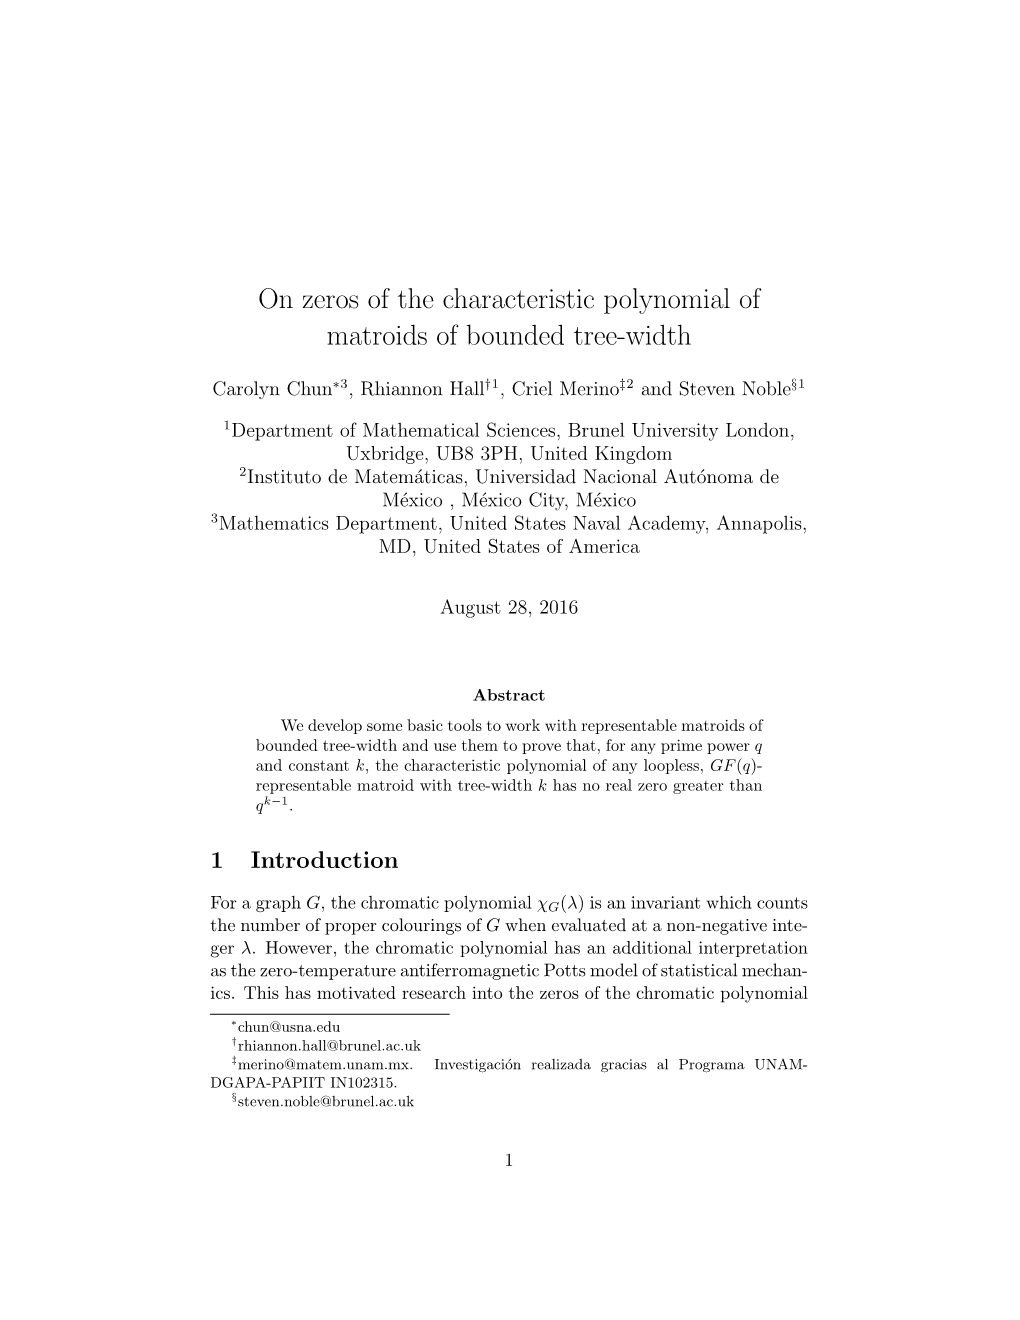 On Zeros of the Characteristic Polynomial of Matroids of Bounded Tree-Width